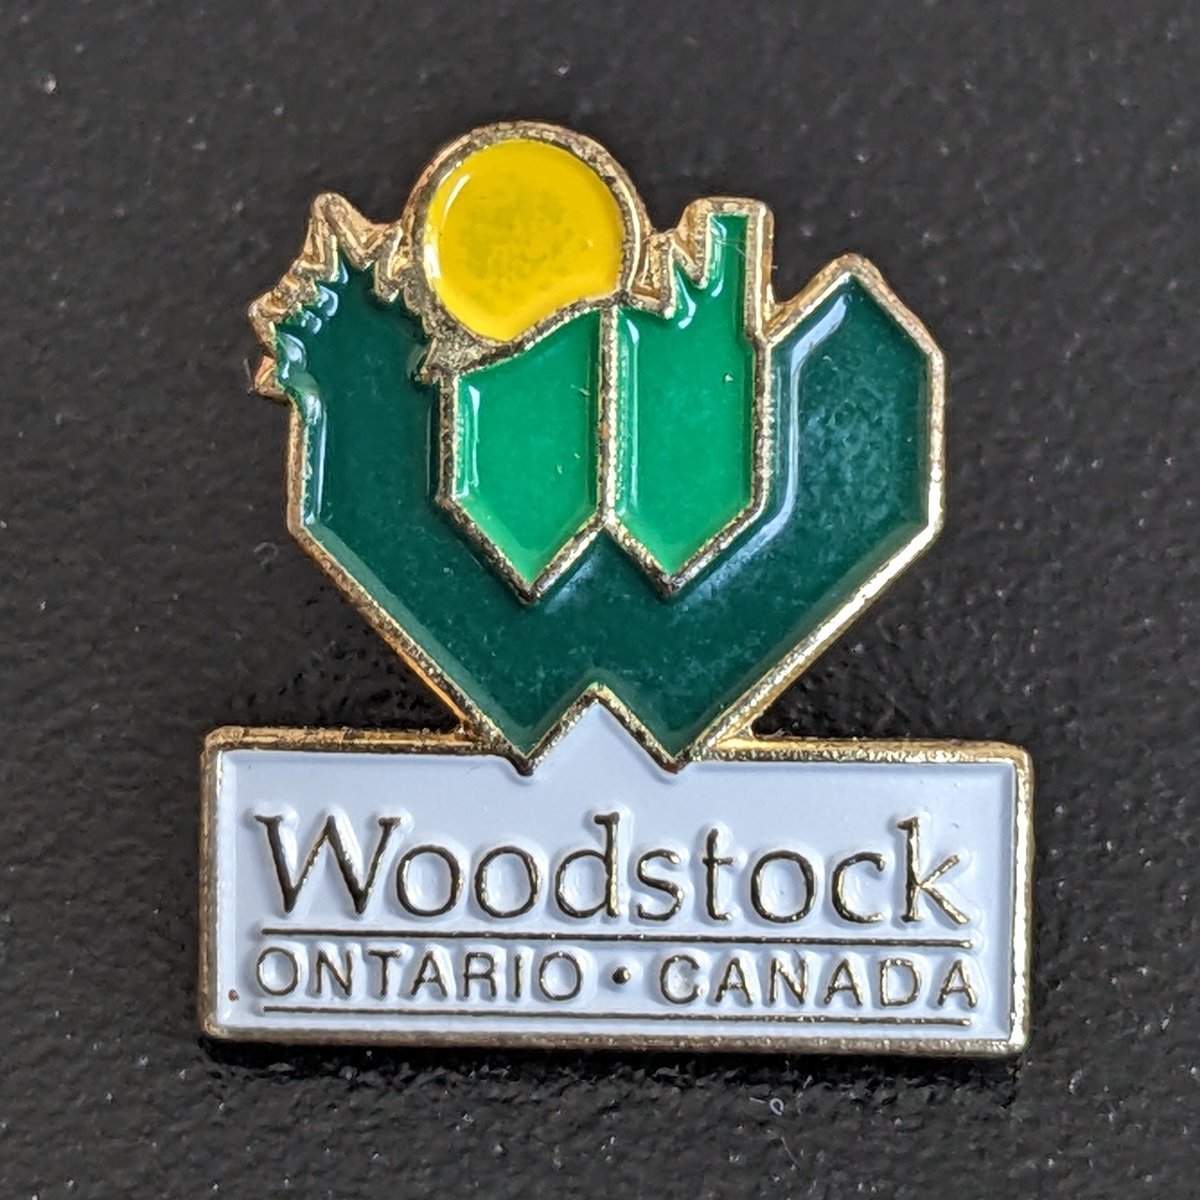 In the 1830s, British Admiral Henry Vansittart named Woodstock after a village in England. The original Old English name “Wodestock” was first recorded in 1086 as a royal forest.

#PinQuestON #onmuni #ontario #canada #onheritage #placenames #woodstock  @cityofwoodstock